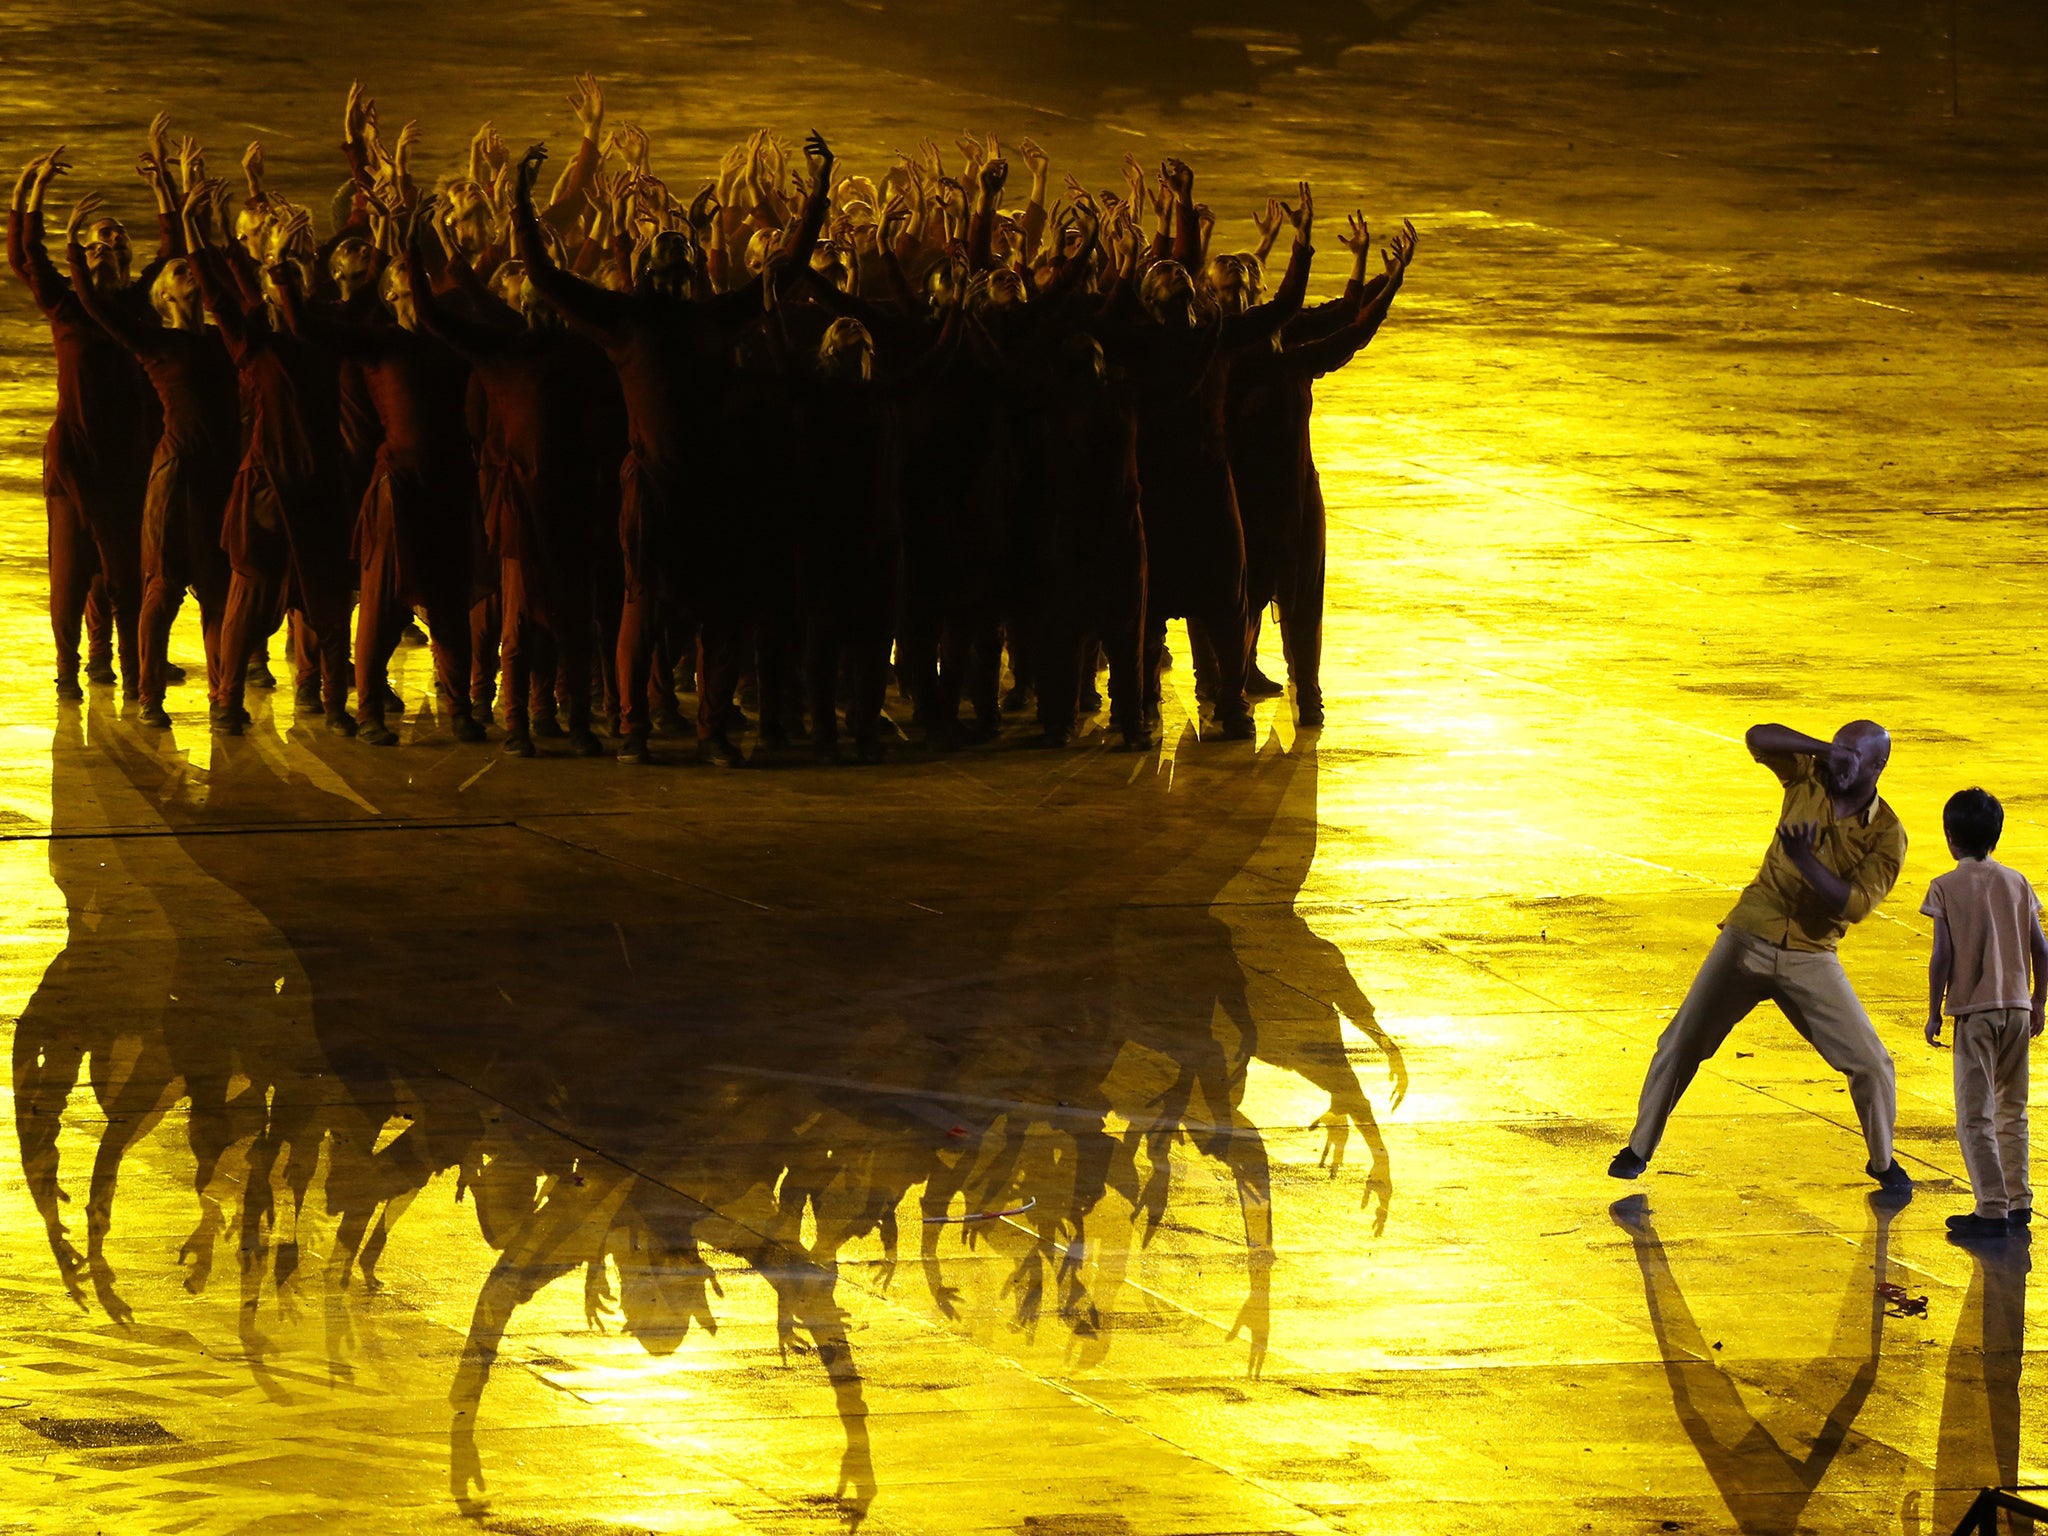 A segment of the 2012 Olympics’ Opening Ceremony, designed by Akram Khan